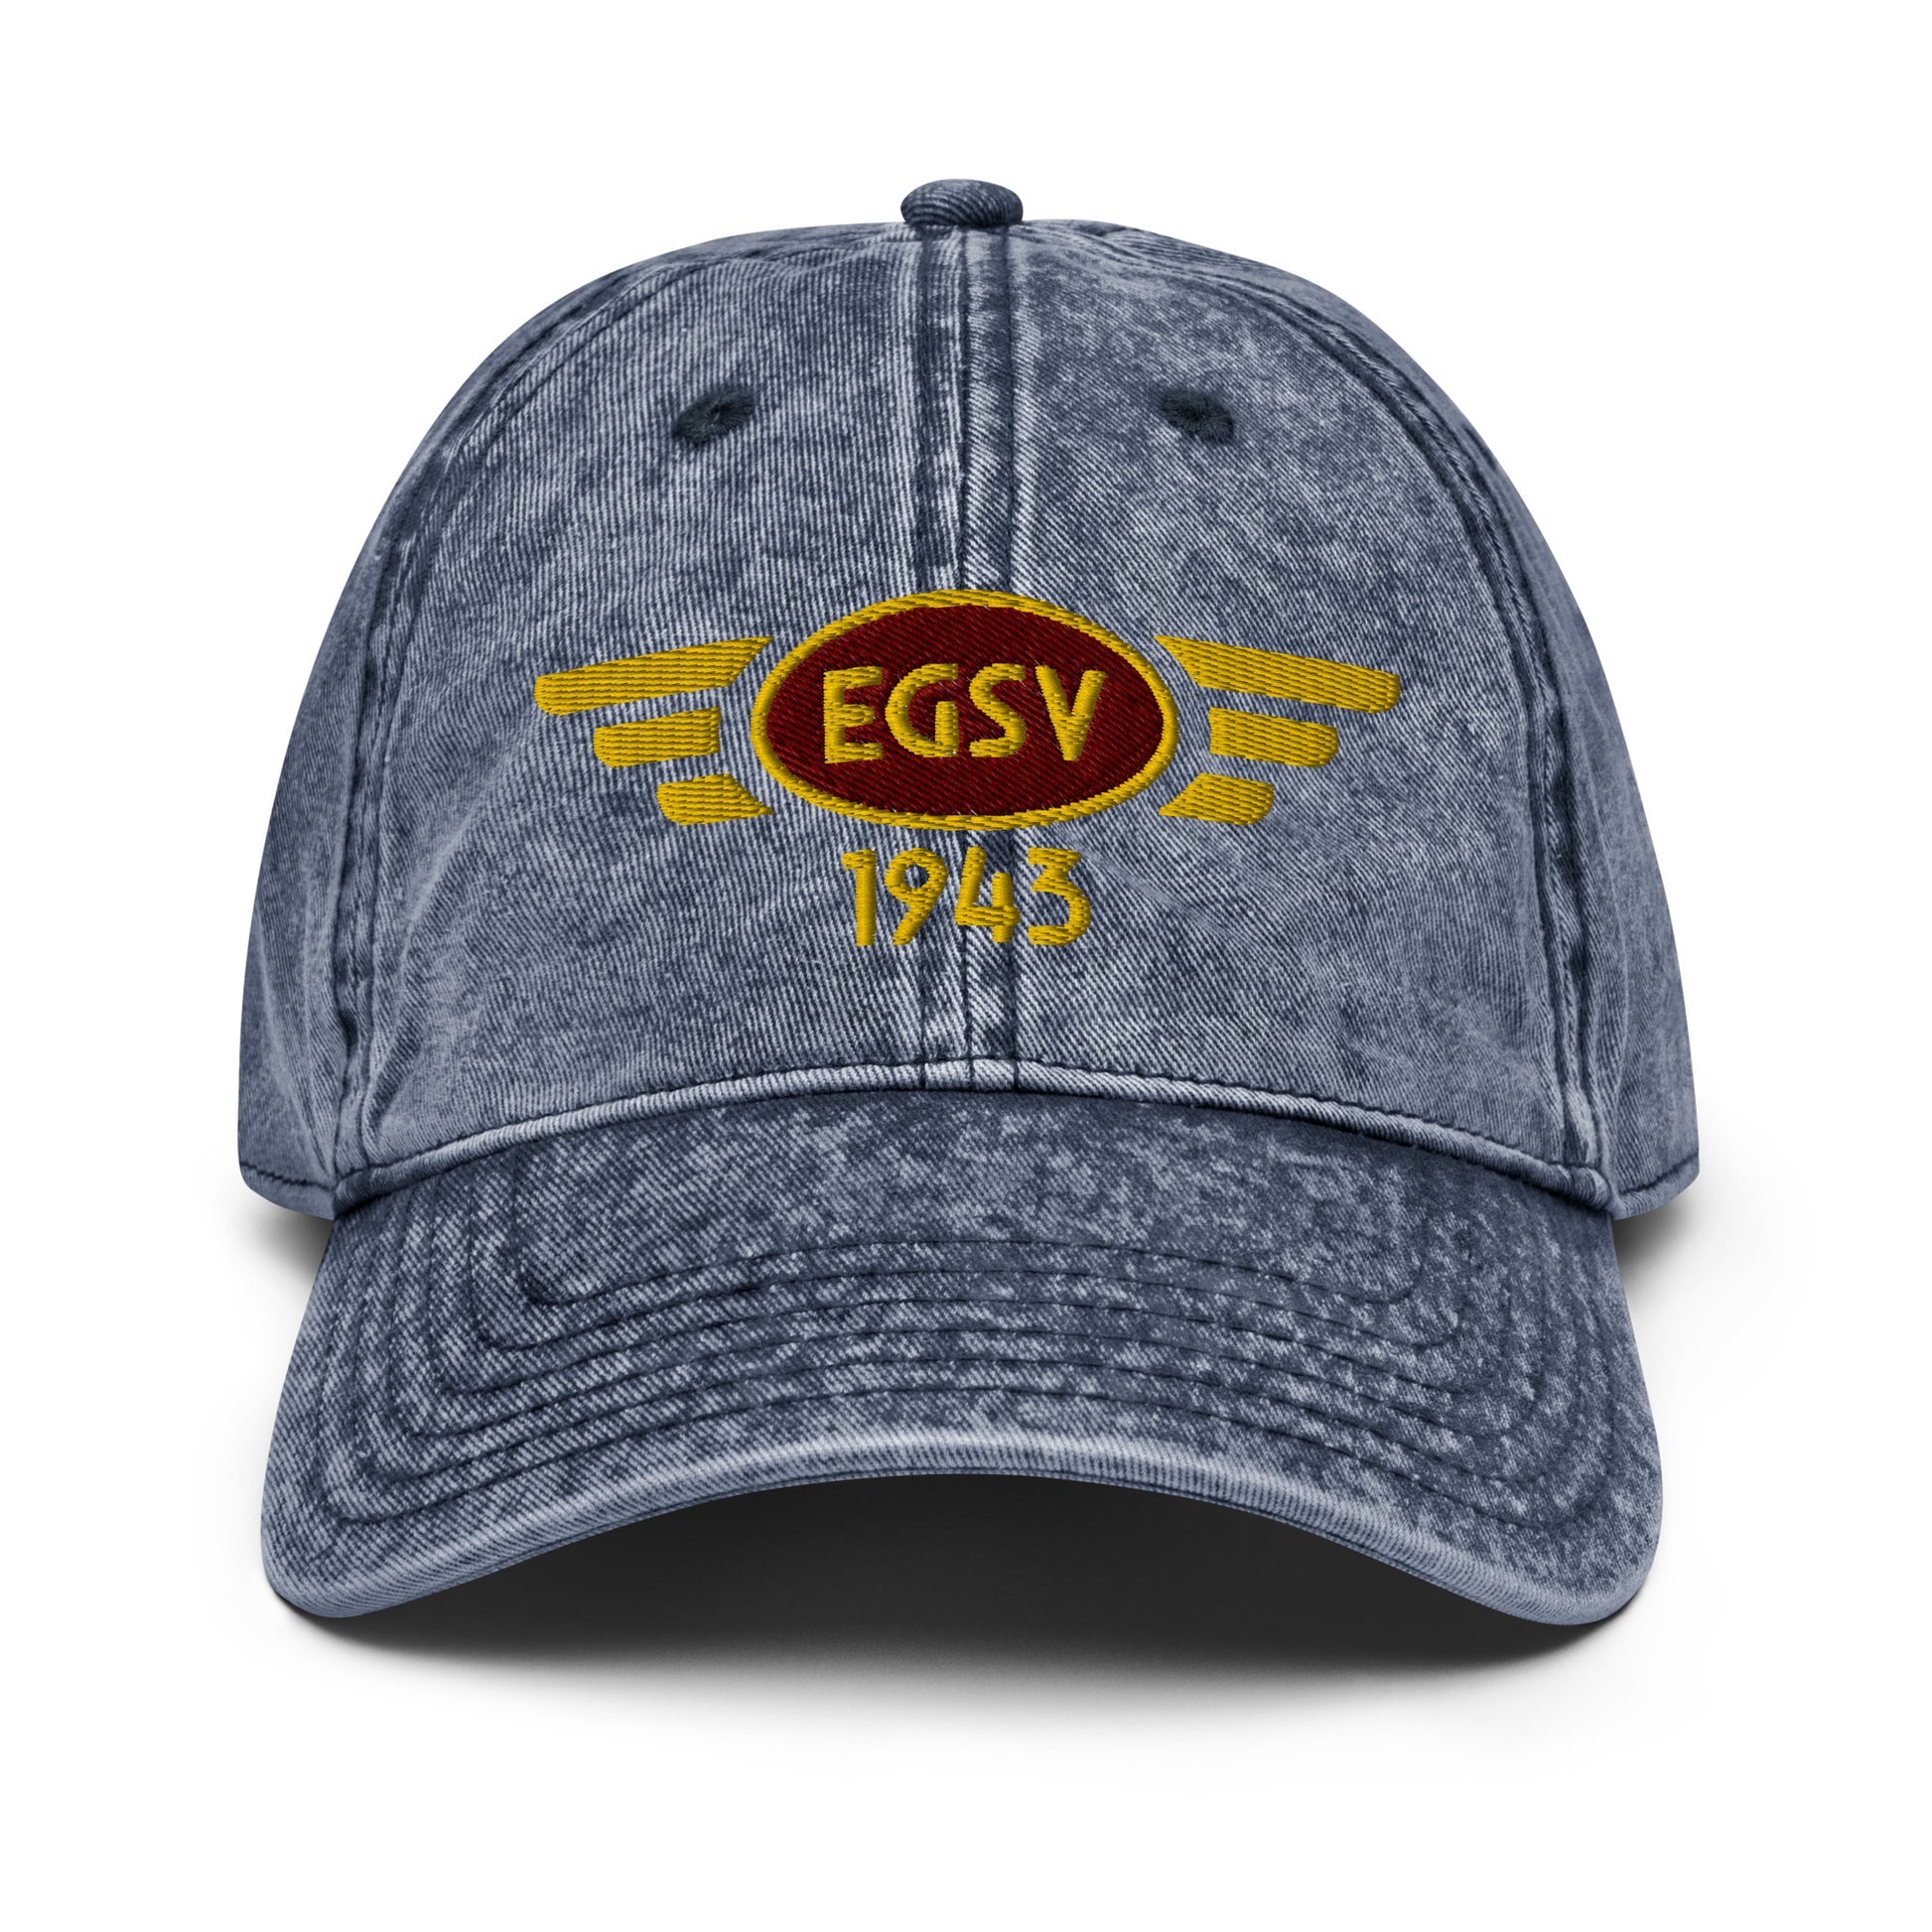 Blue cotton twill baseball cap with embroidered vintage style aviation logo for Old Buckenham Airfield.